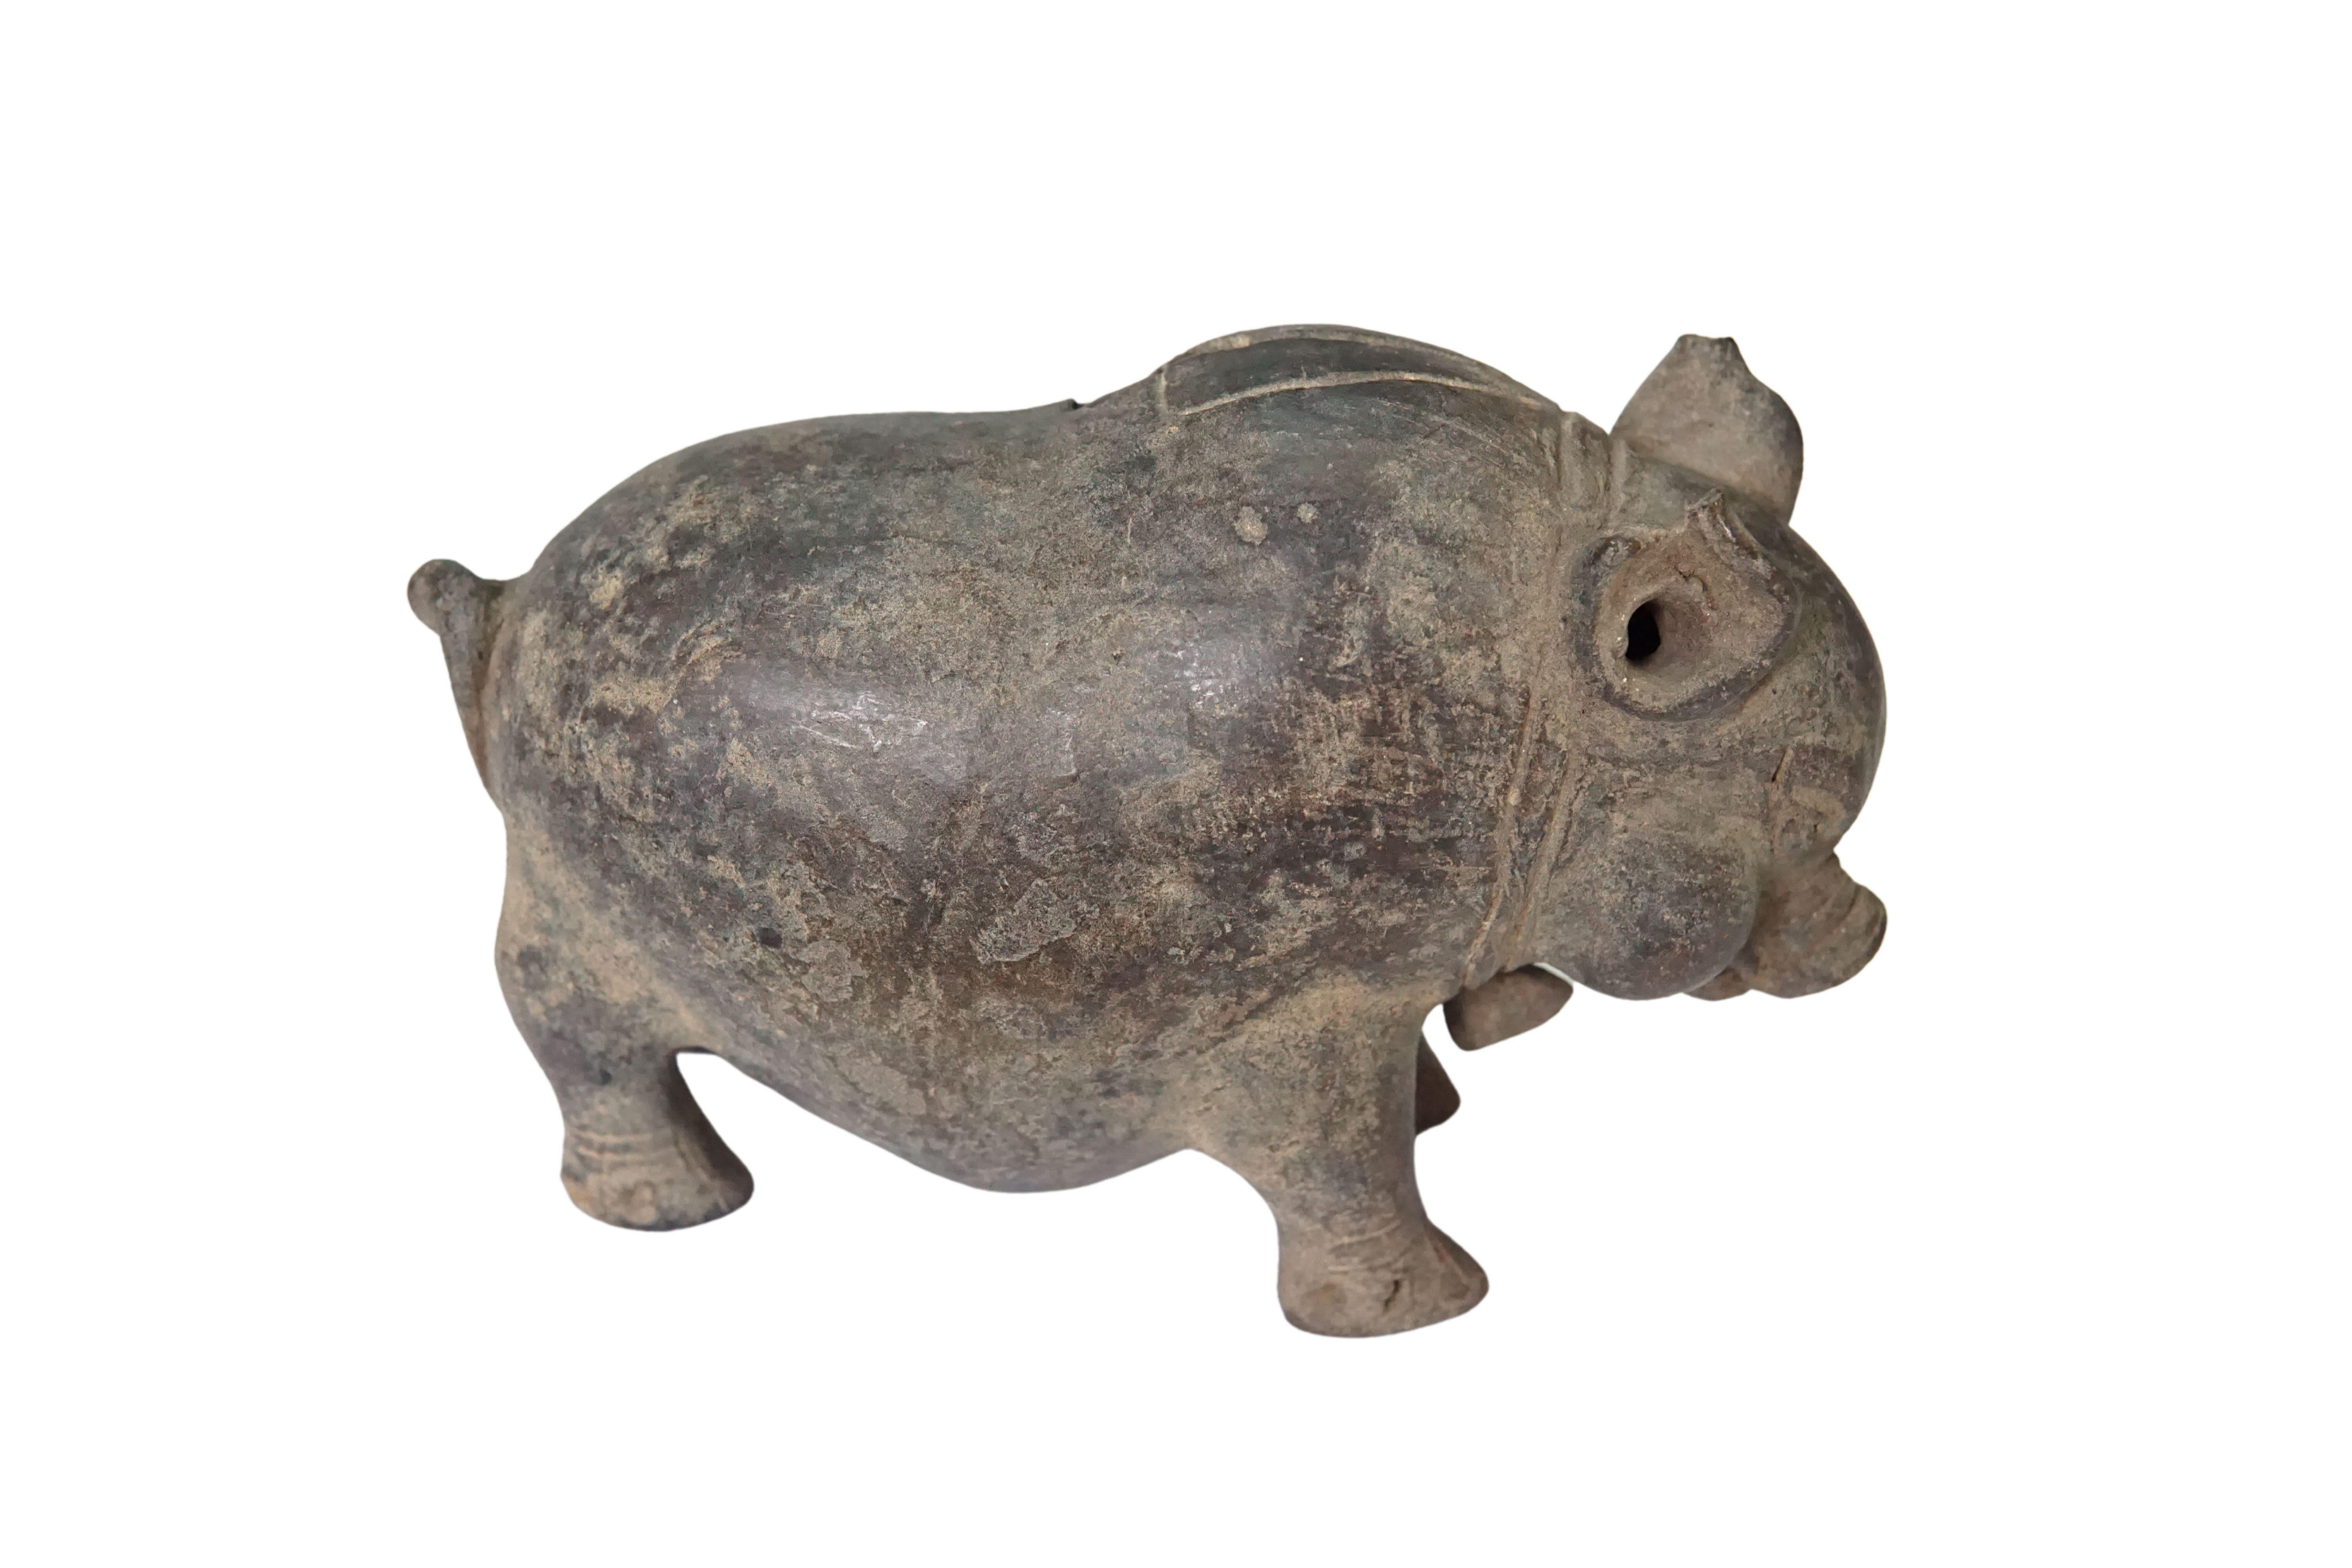 This Majapahit boar from Java is an early example of the 